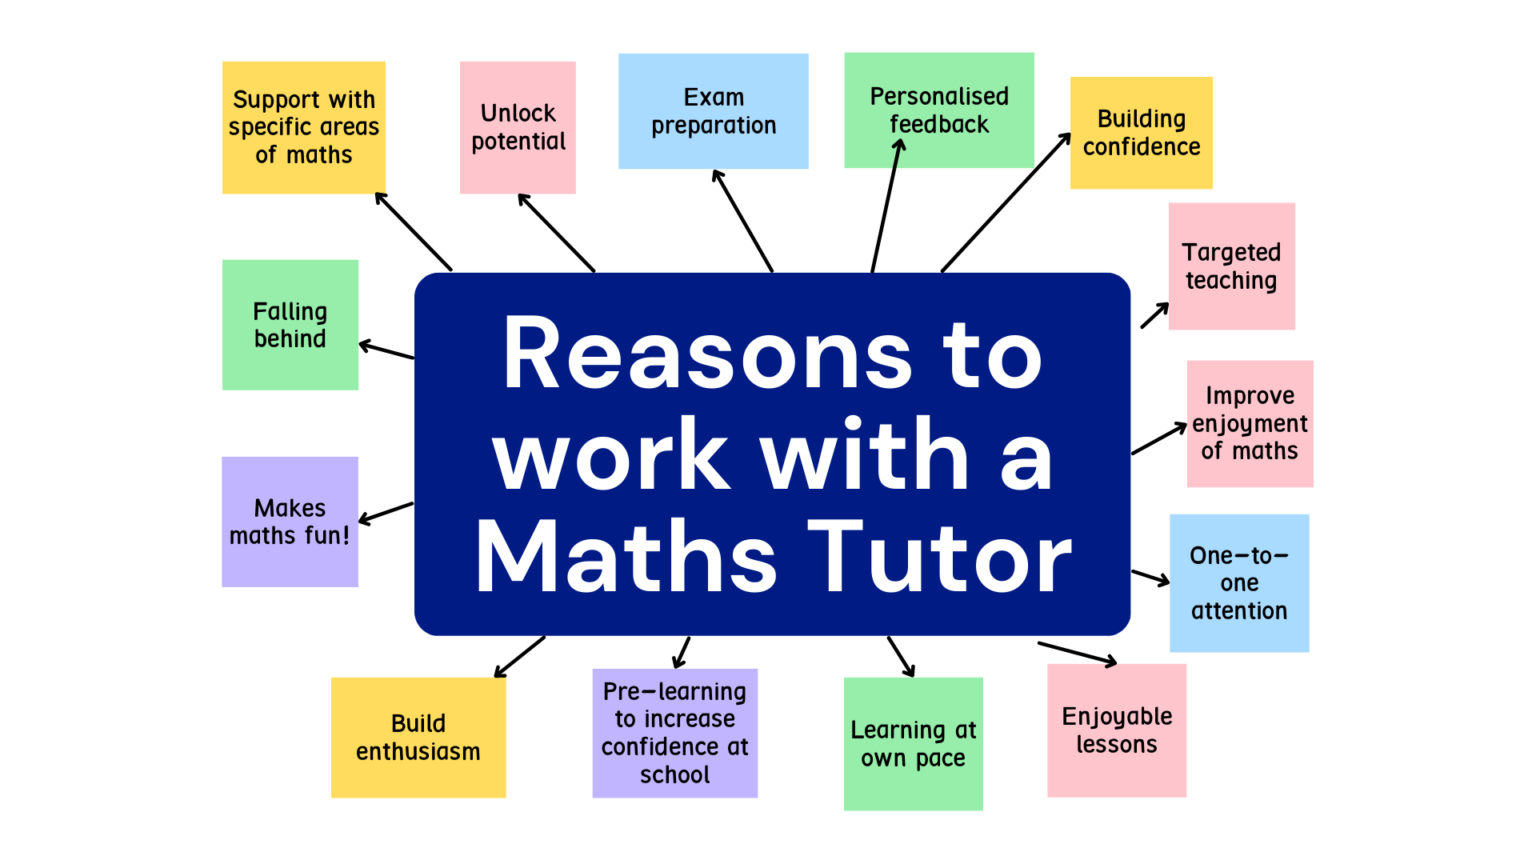 Benefits of private Tutoring